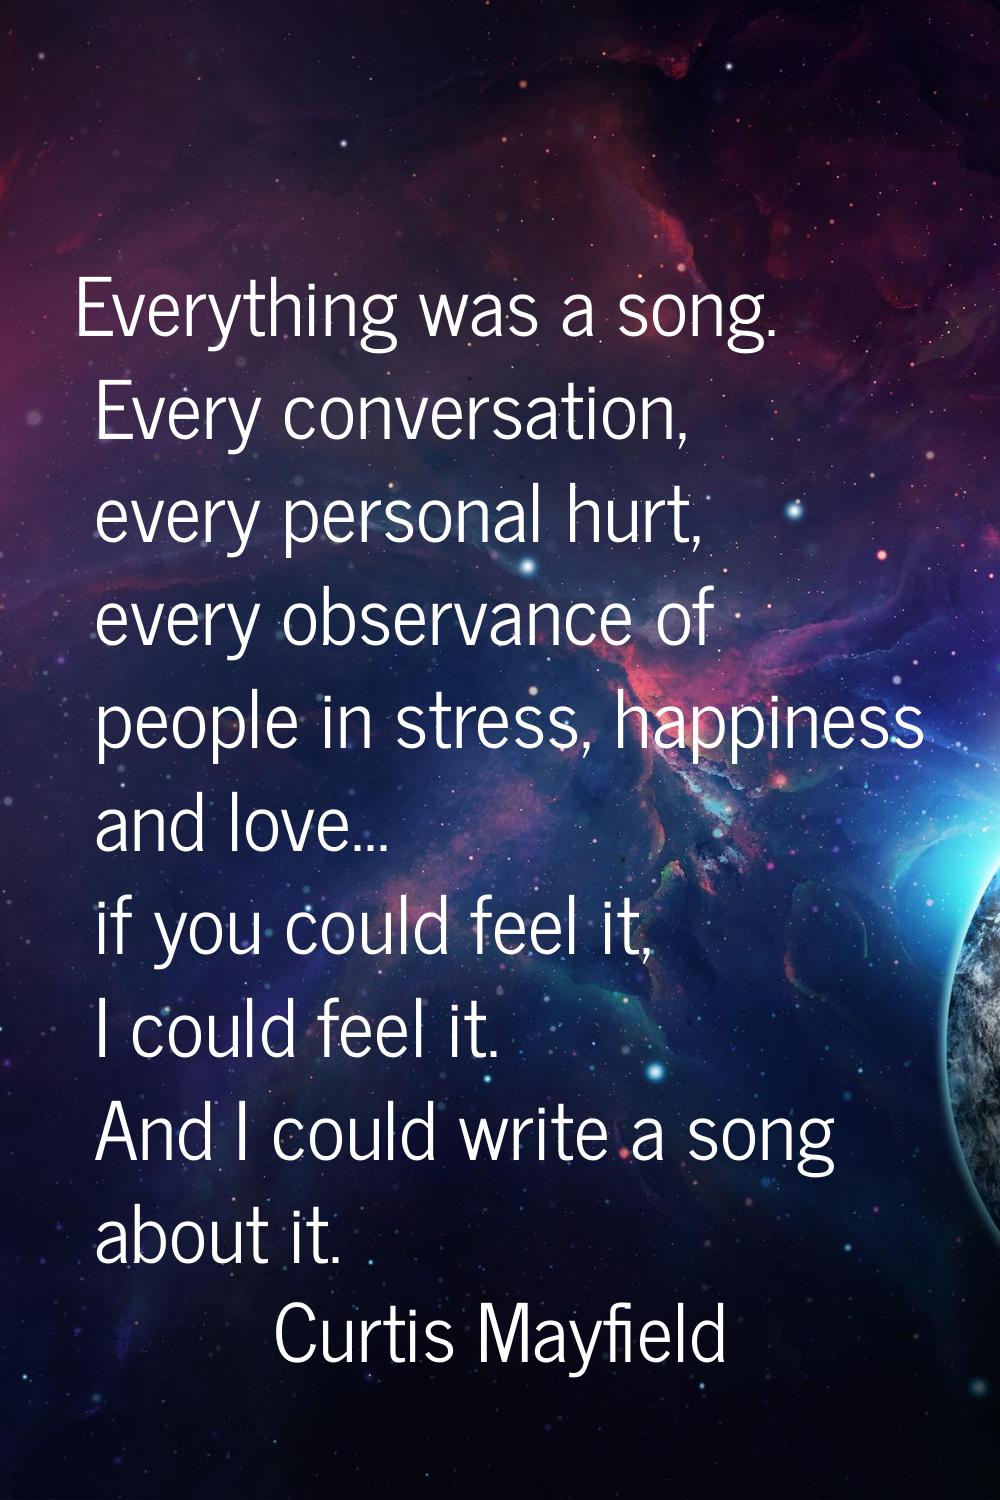 Everything was a song. Every conversation, every personal hurt, every observance of people in stres